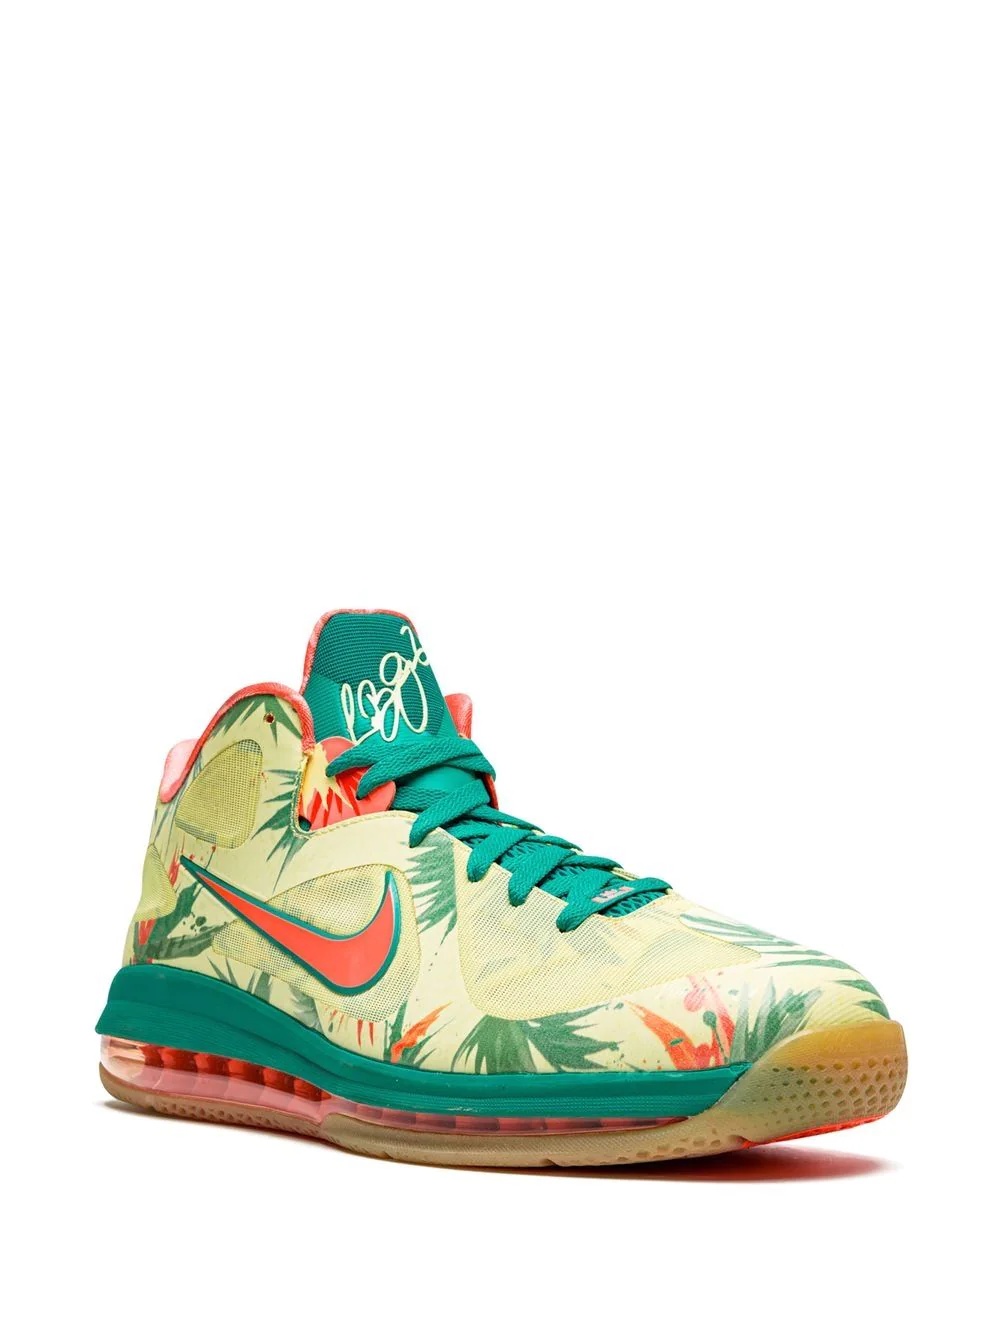 LeBron 9 Low "Arnold Palmer" sneakers - 2